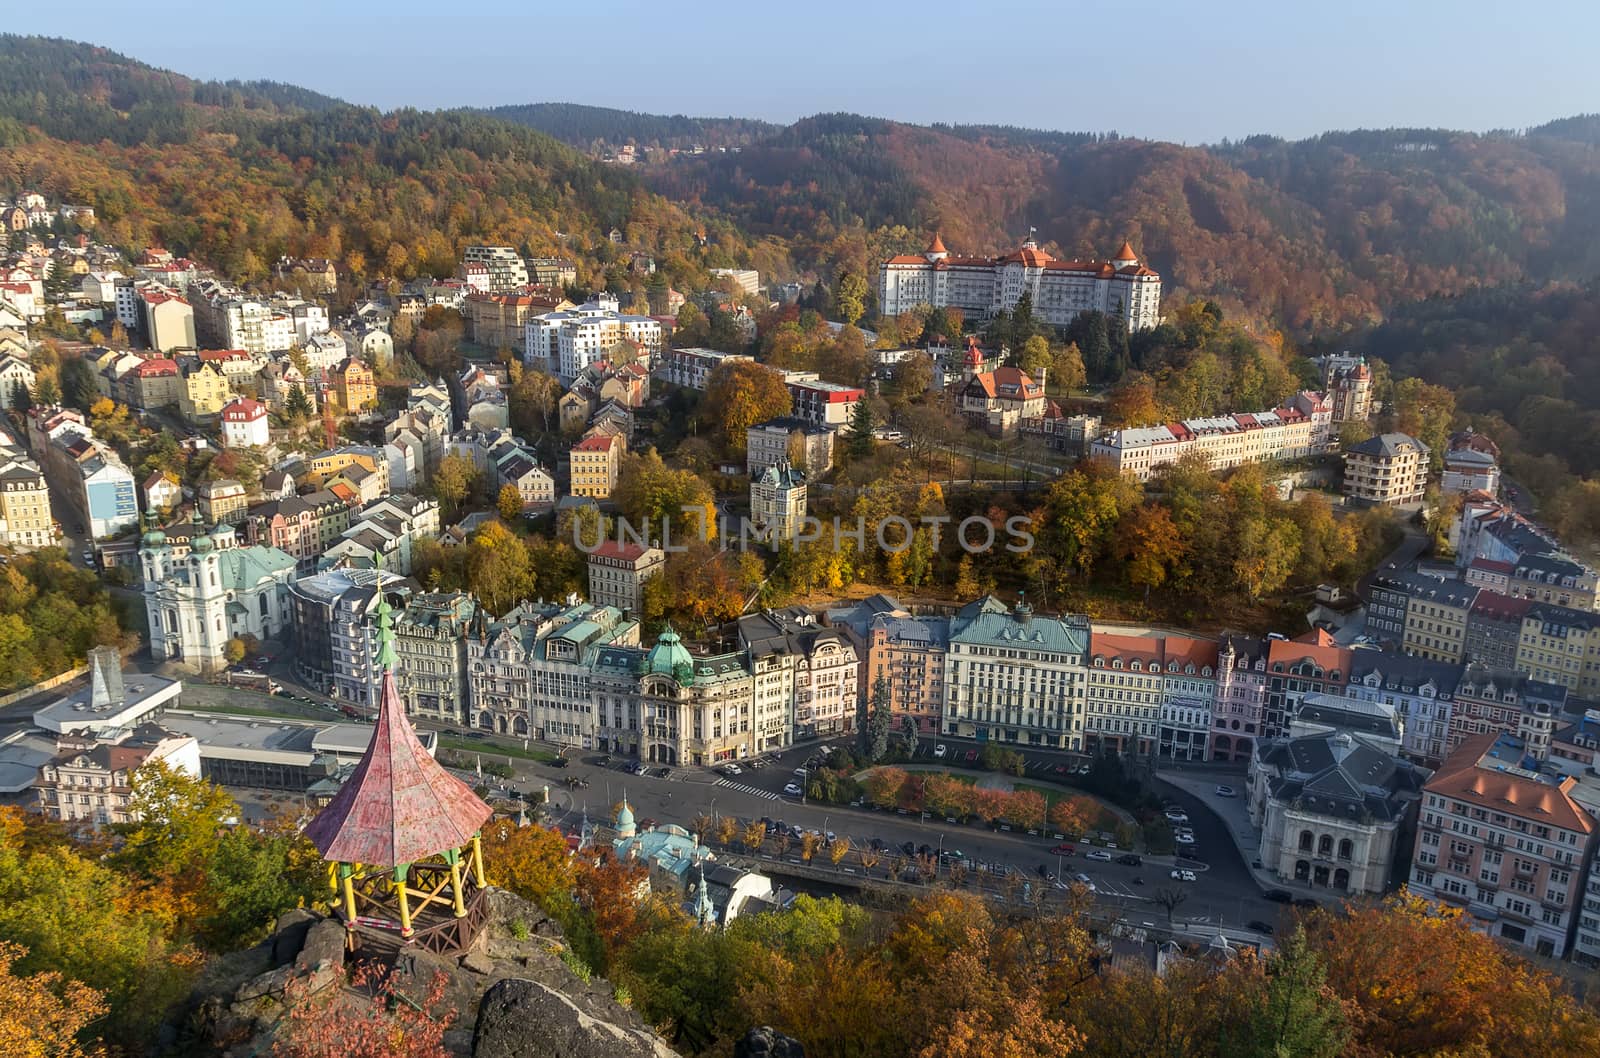 Panorama of Karlovy Vary from a hill